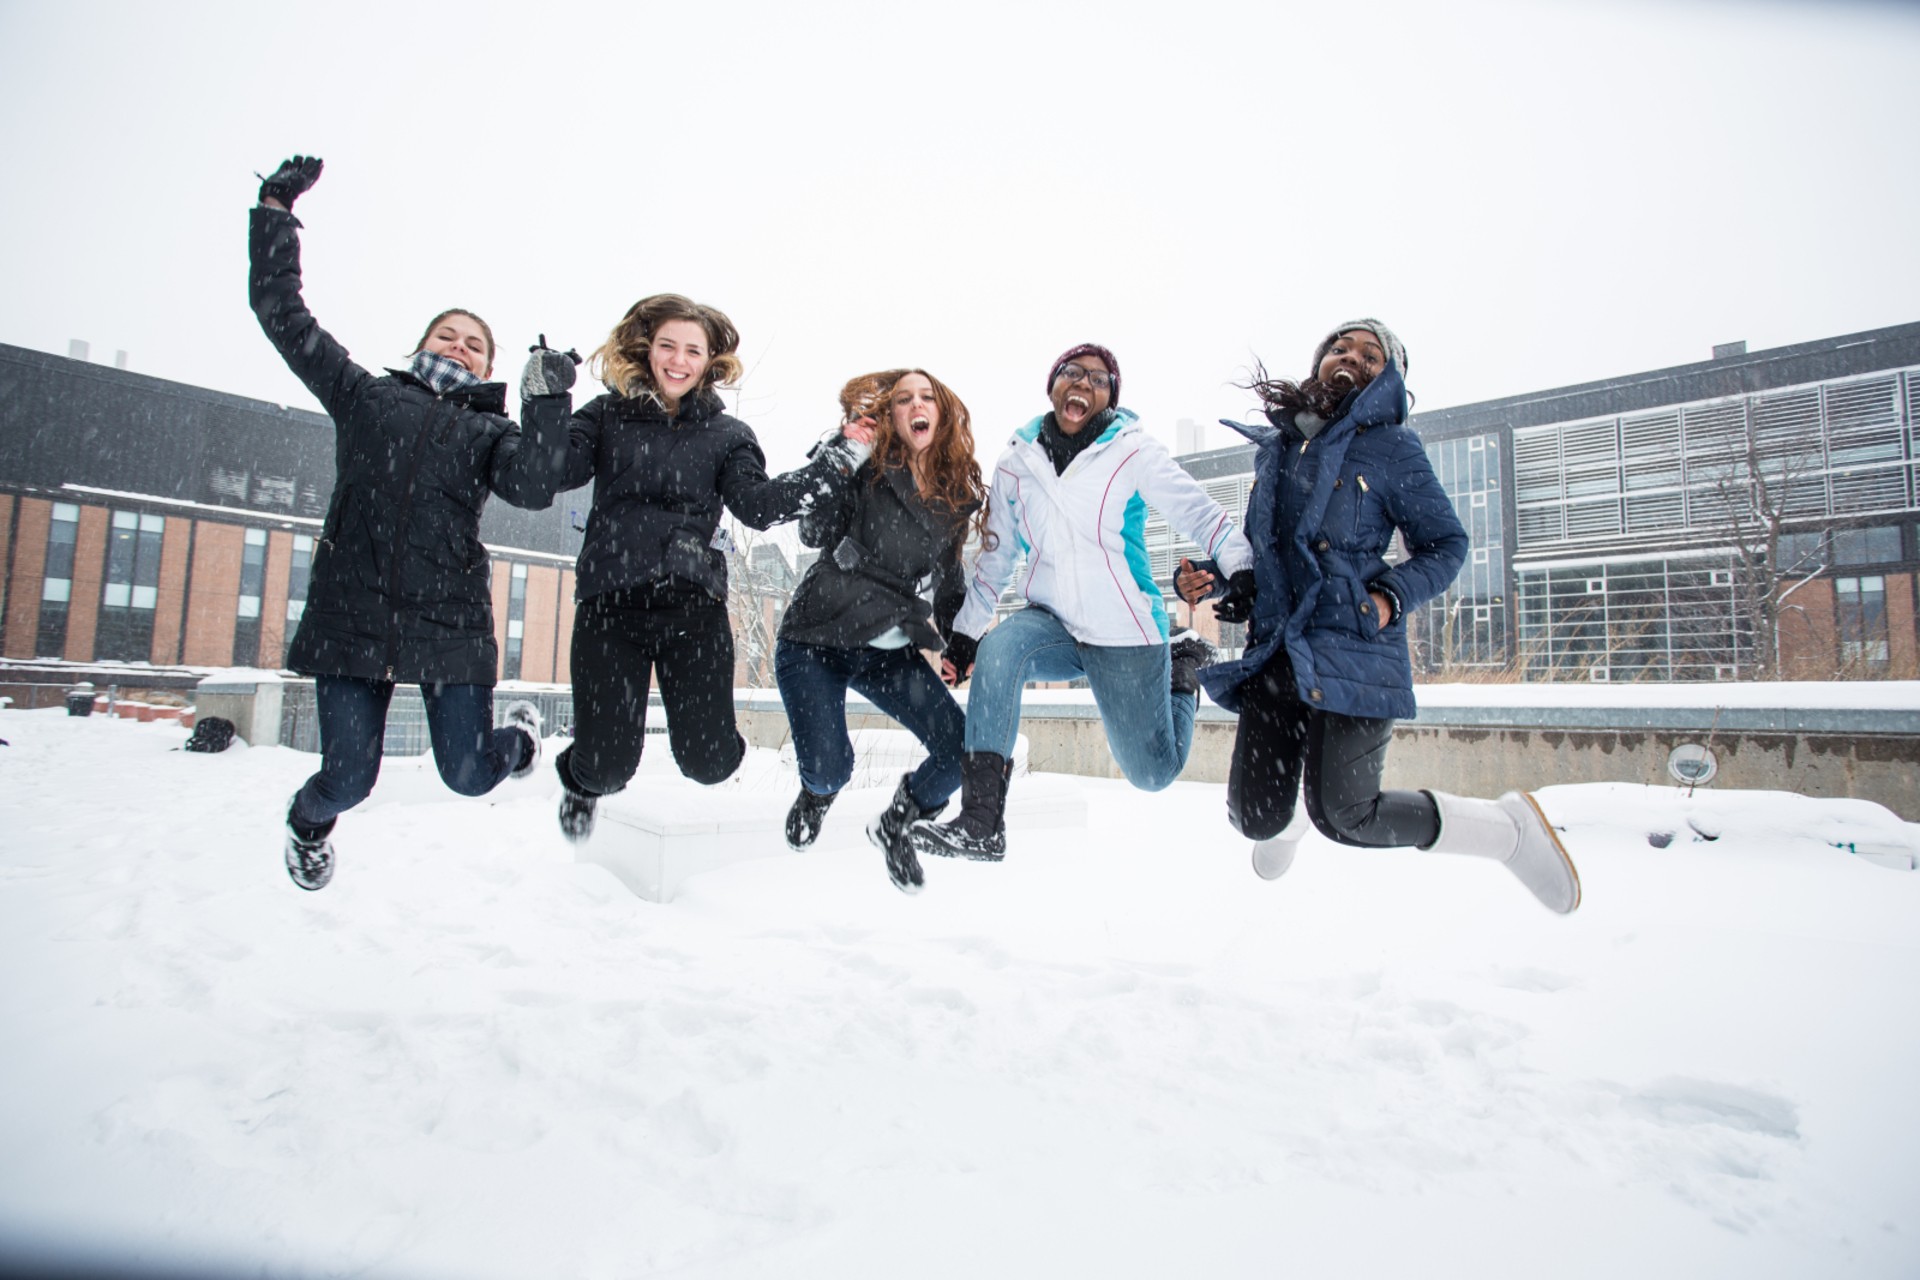 A group of students cheerfully jumping at the same time for the camera at Loyola campus